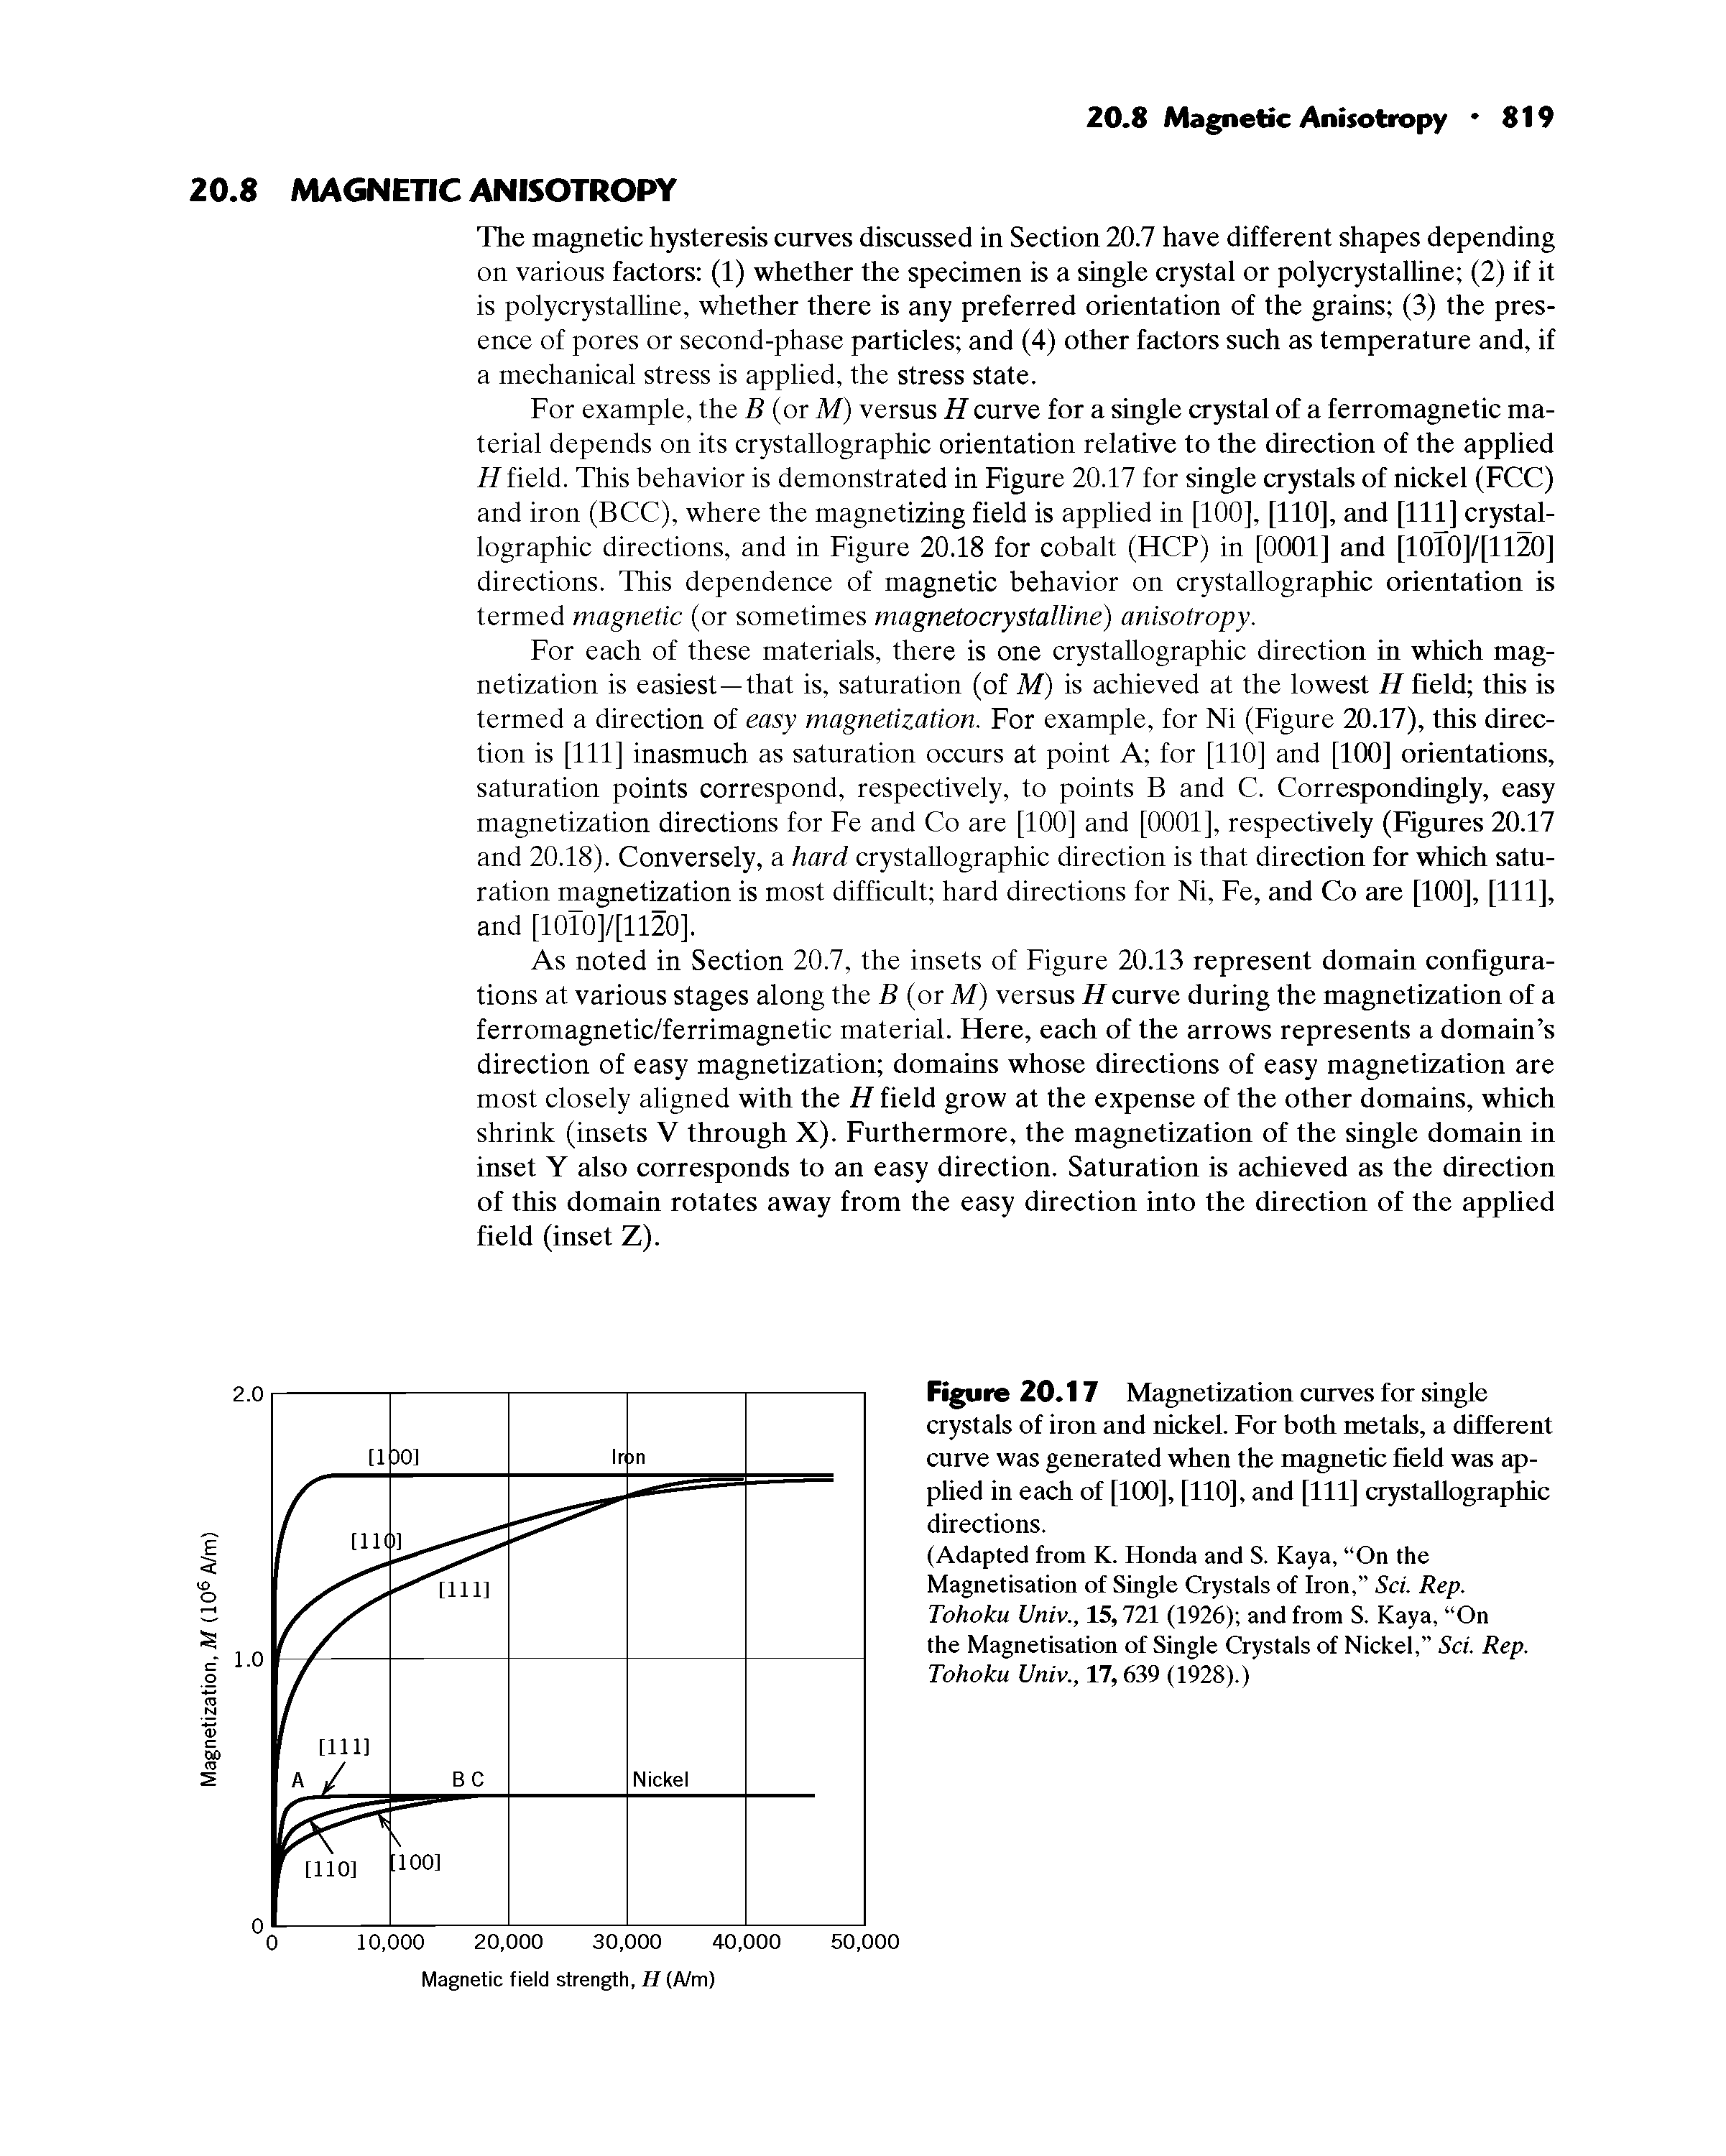 Figure 20.17 Magnetization curves for single crystals of iron and nickel. For both metals, a different curve was generated when the magnetic field was applied in each of [100], [110], and [111] crystallographic directions.